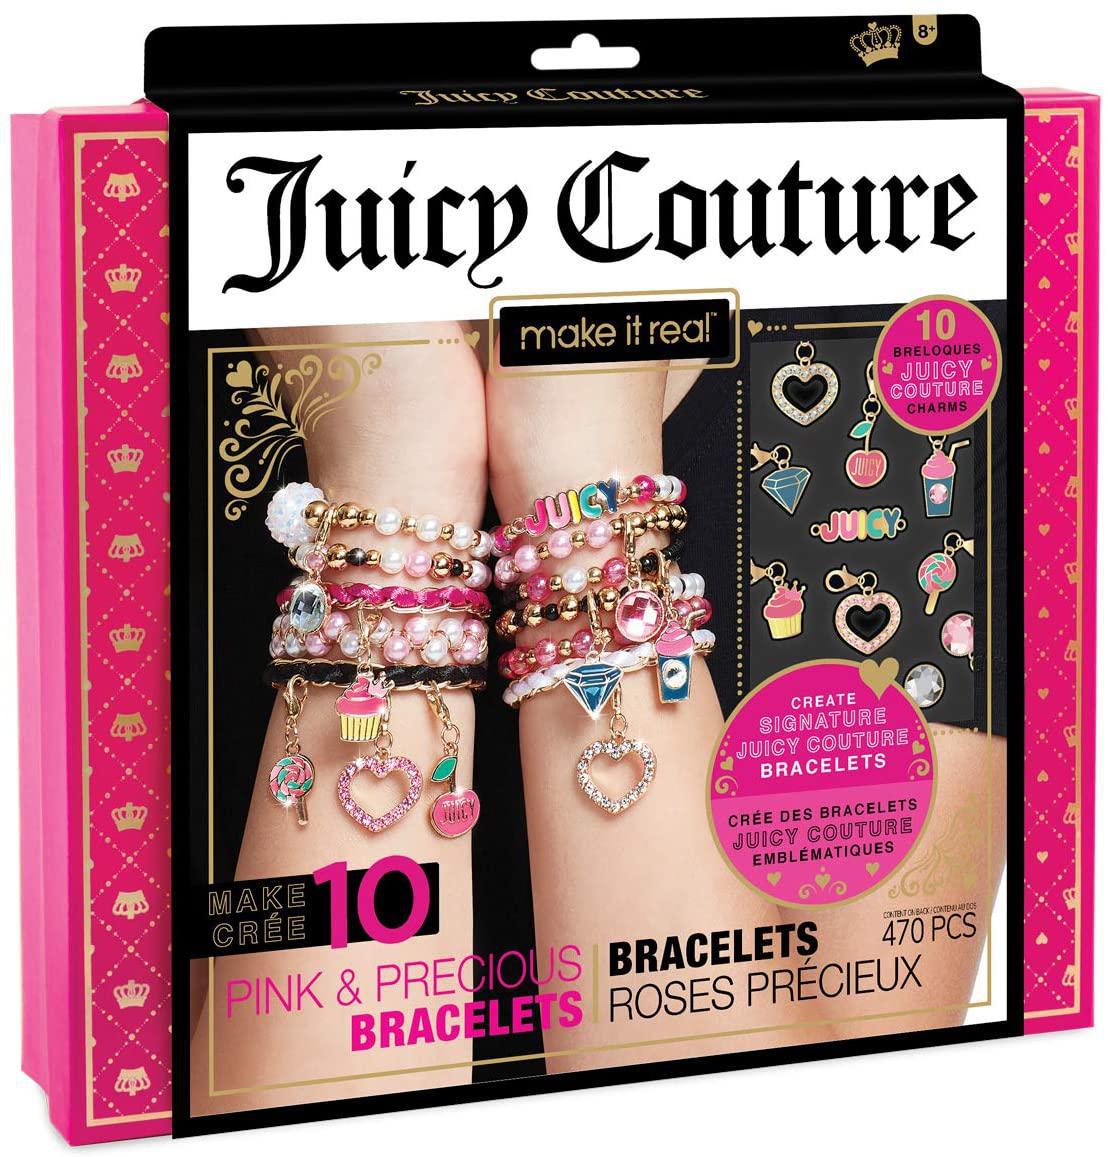 Make It Real - Juicy Couture Pink and Precious Bracelets - DIY Charm Bracelet Kit with Beads for Tween Jewelry Making - Jewelry Making Kit for Girls